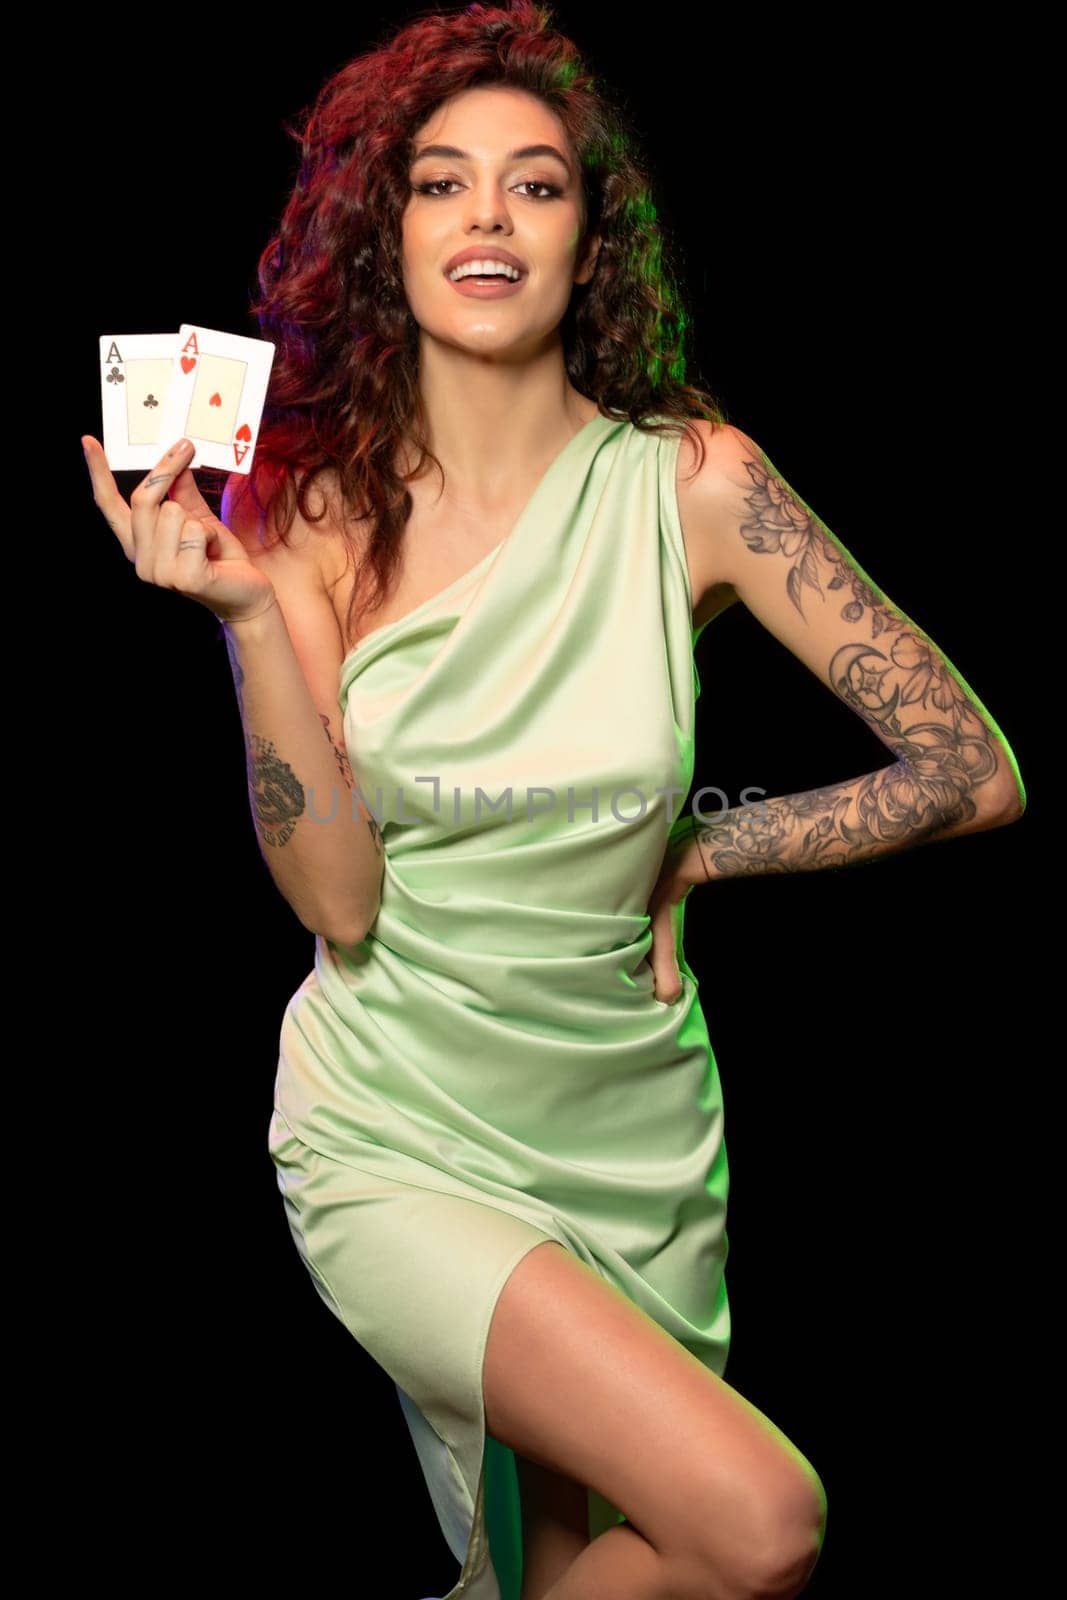 Smiling gambling young woman holding winning set of two aces by nazarovsergey